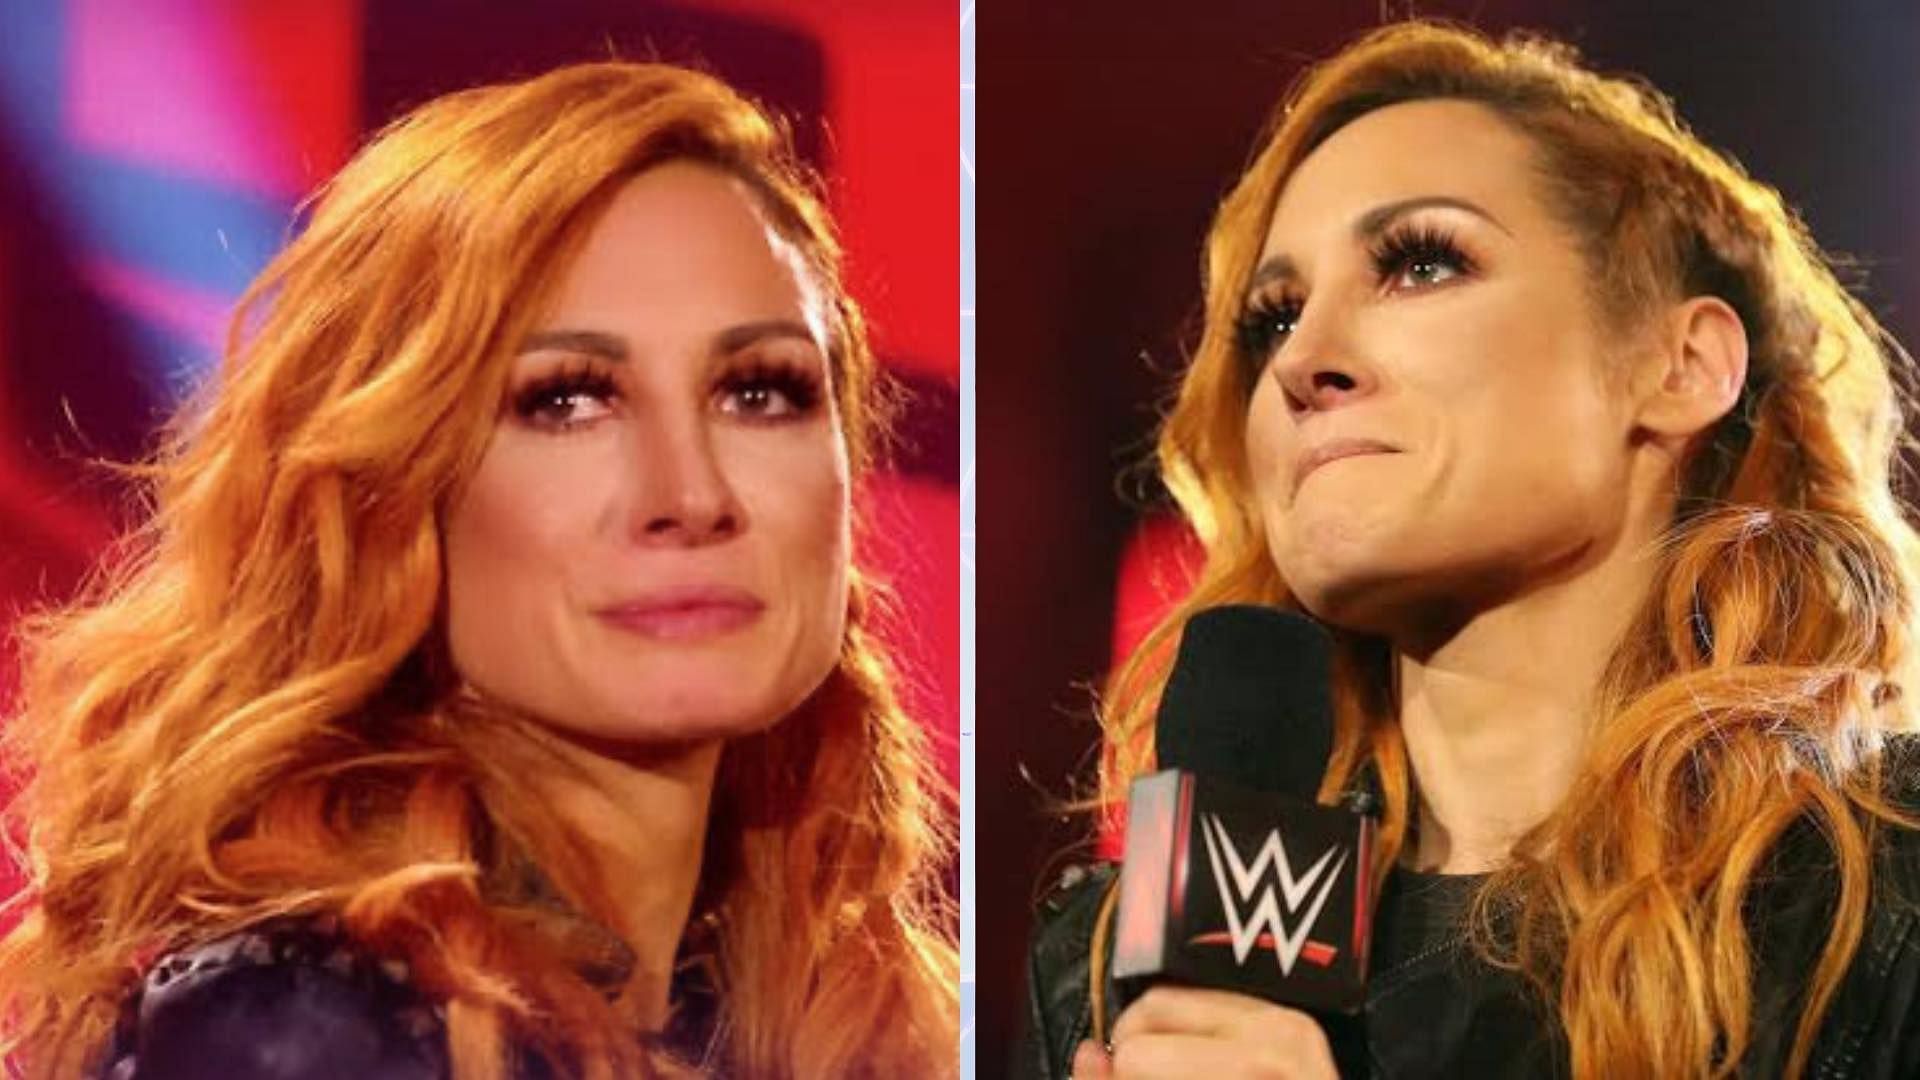 Becky Lynch has become an important member of the WWE roster